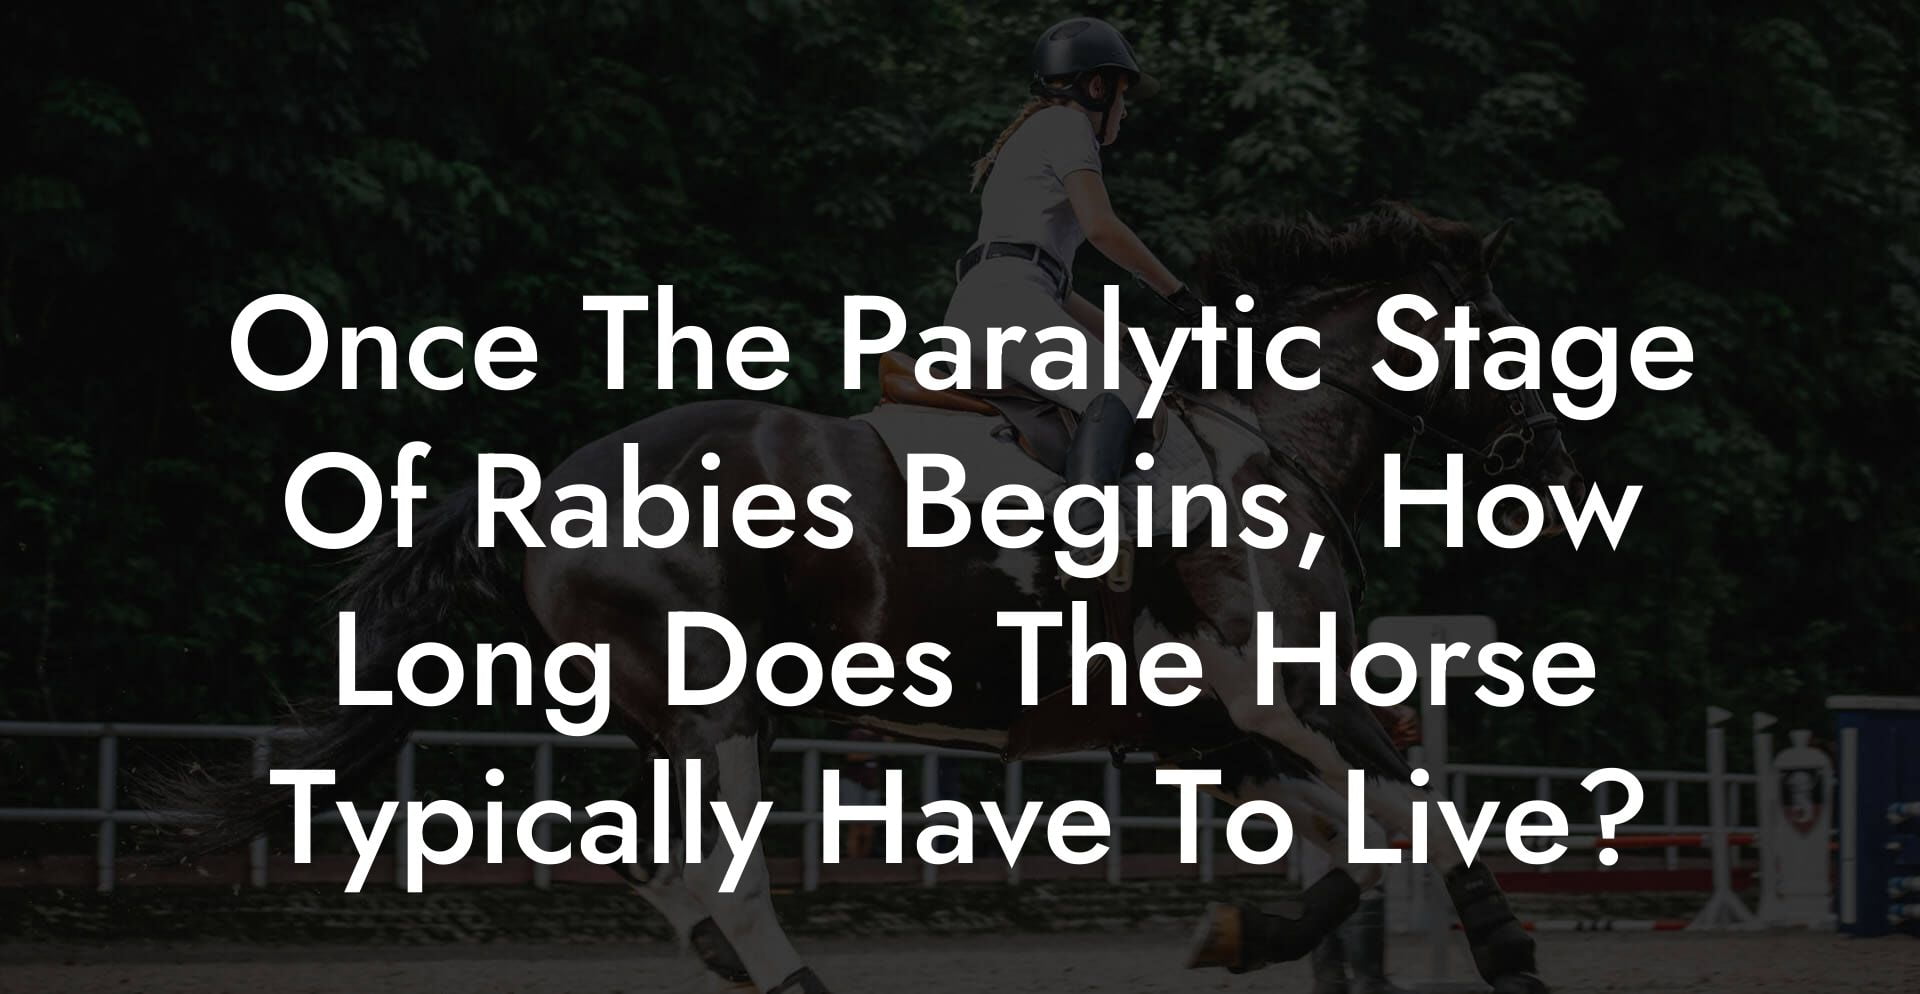 Once The Paralytic Stage Of Rabies Begins, How Long Does The Horse Typically Have To Live?